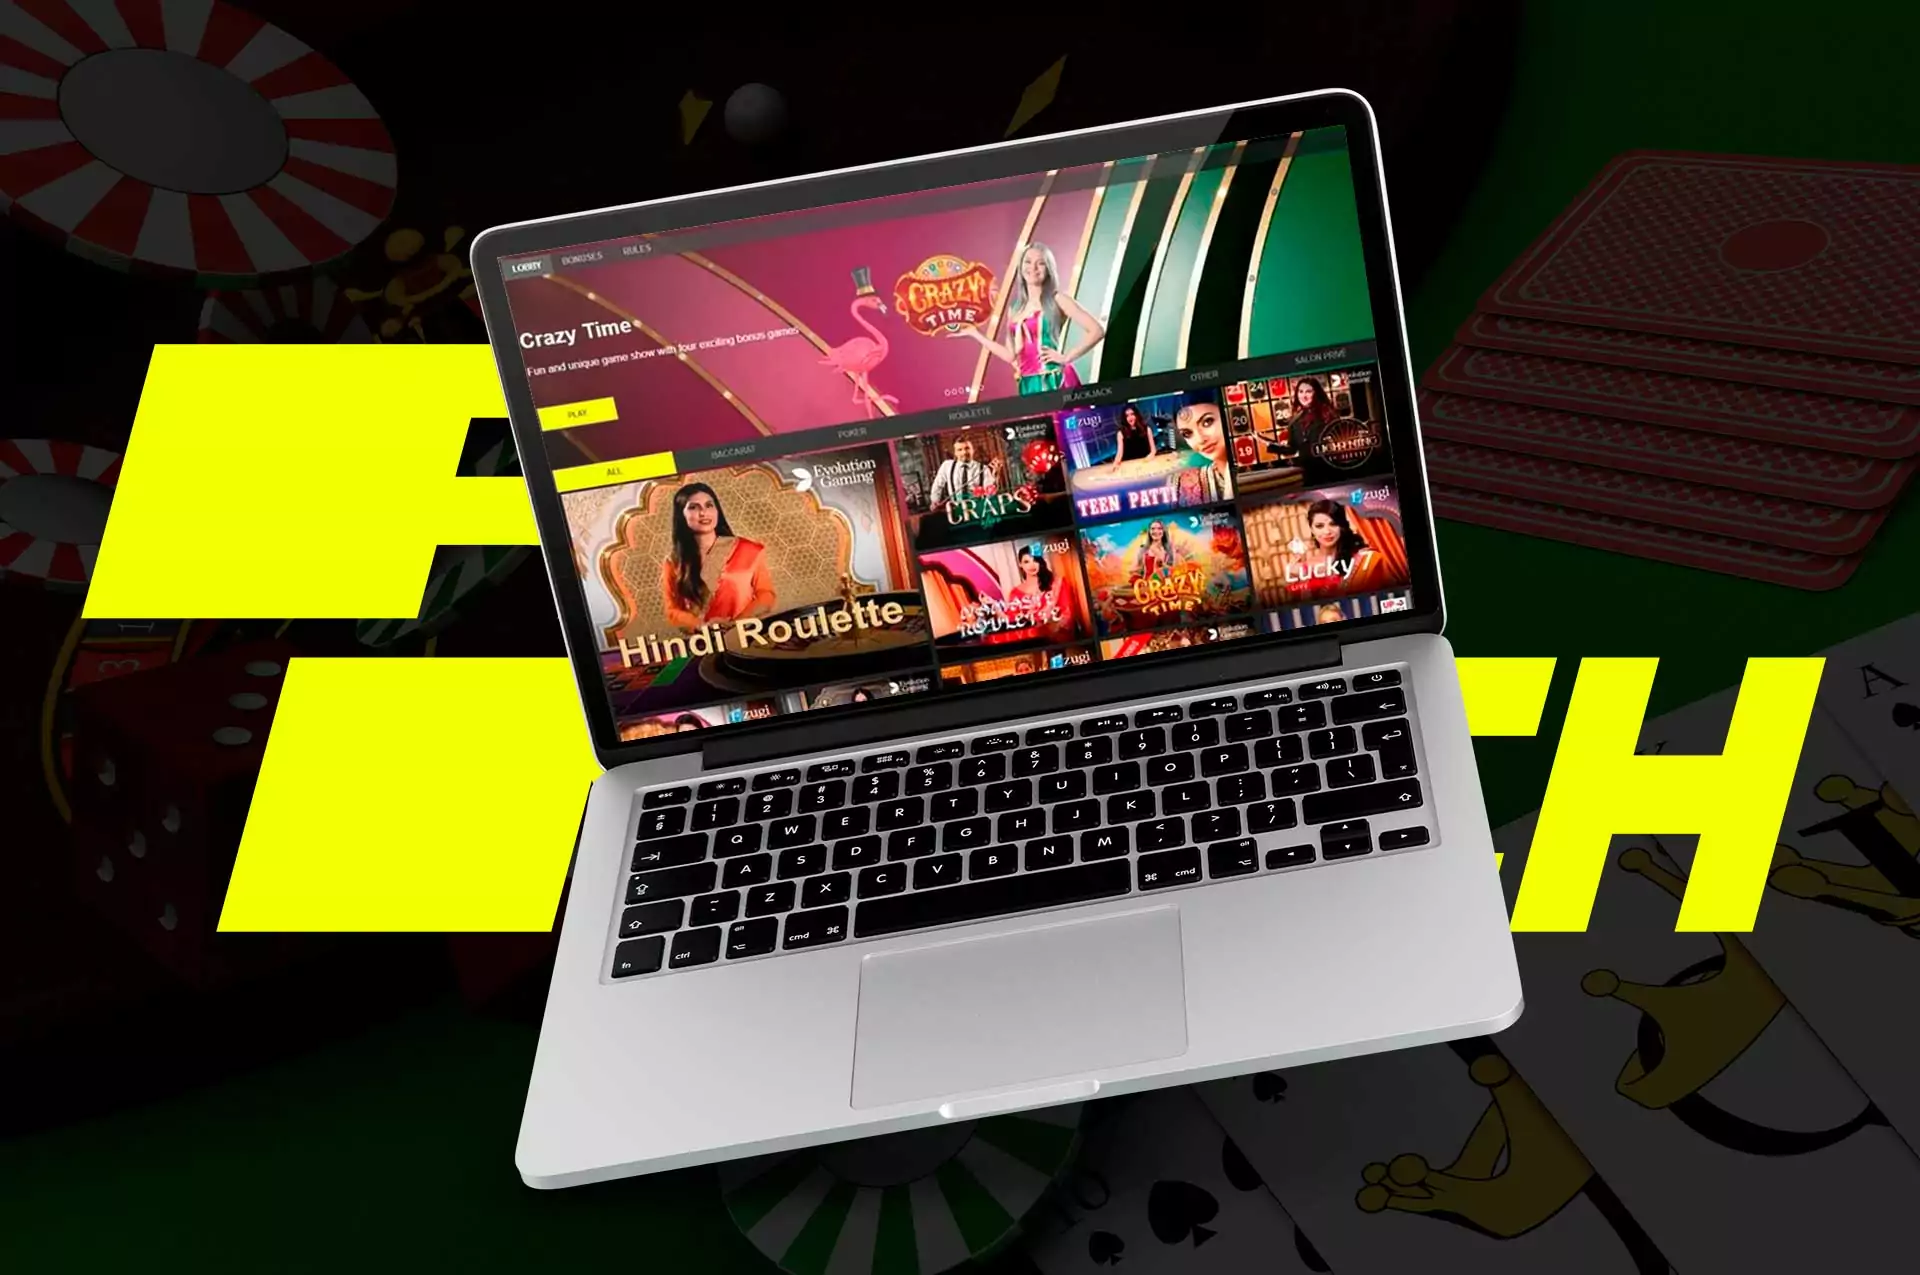 Play casino games with real dealers at the Parimatch live casino.